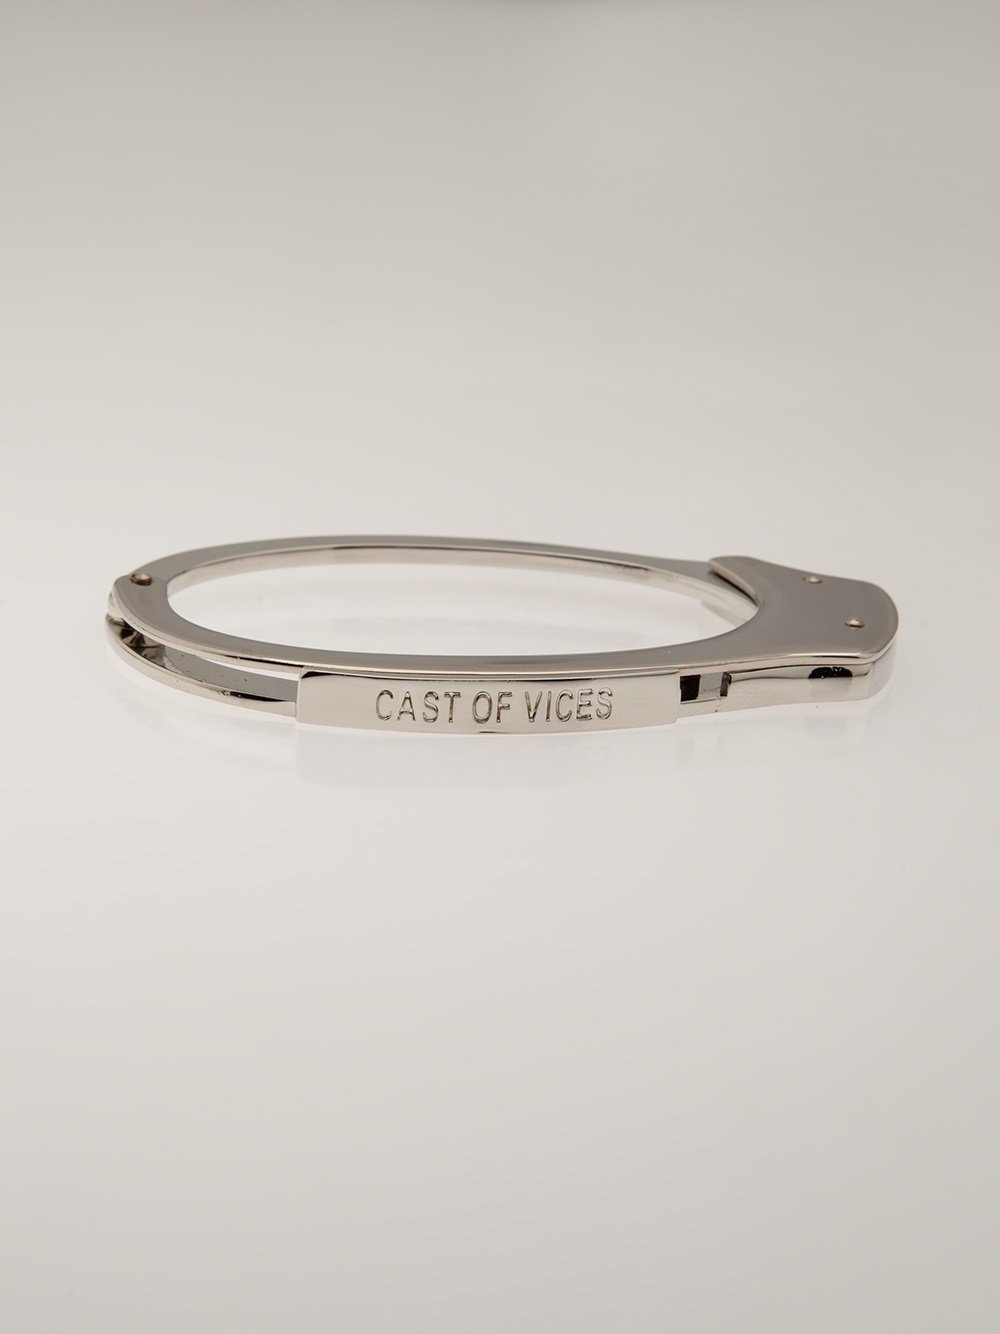 Cast Of Vices Hand Cuff Bracelet in Metallic for Men | Lyst